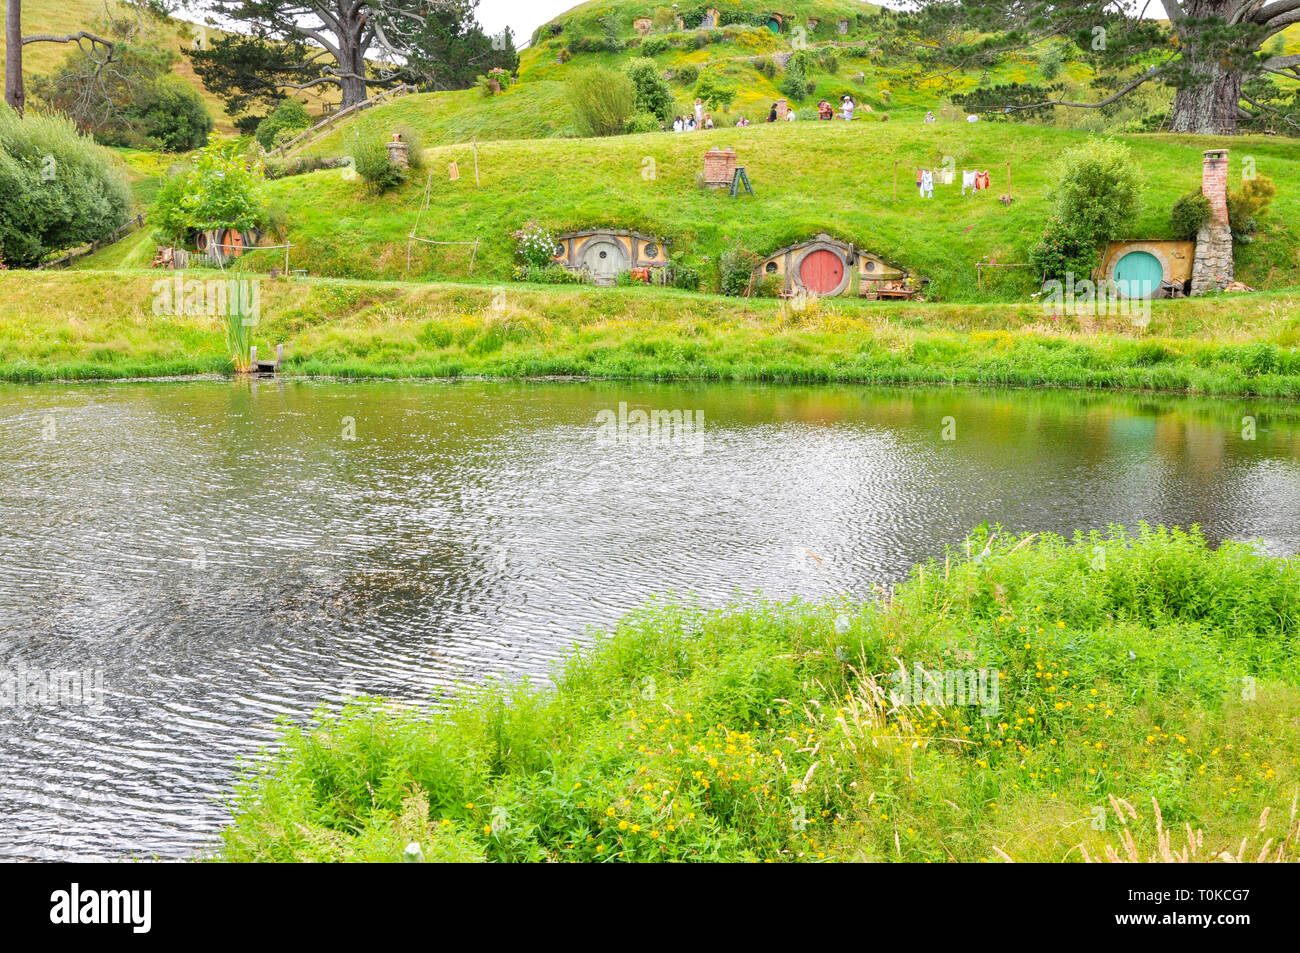 Hobbiton Movie Set - Location for the Lord of the Rings and The Hobbit films. Bag End homes, doors. Visitor attraction in Waikato region New Zealand Stock Photo